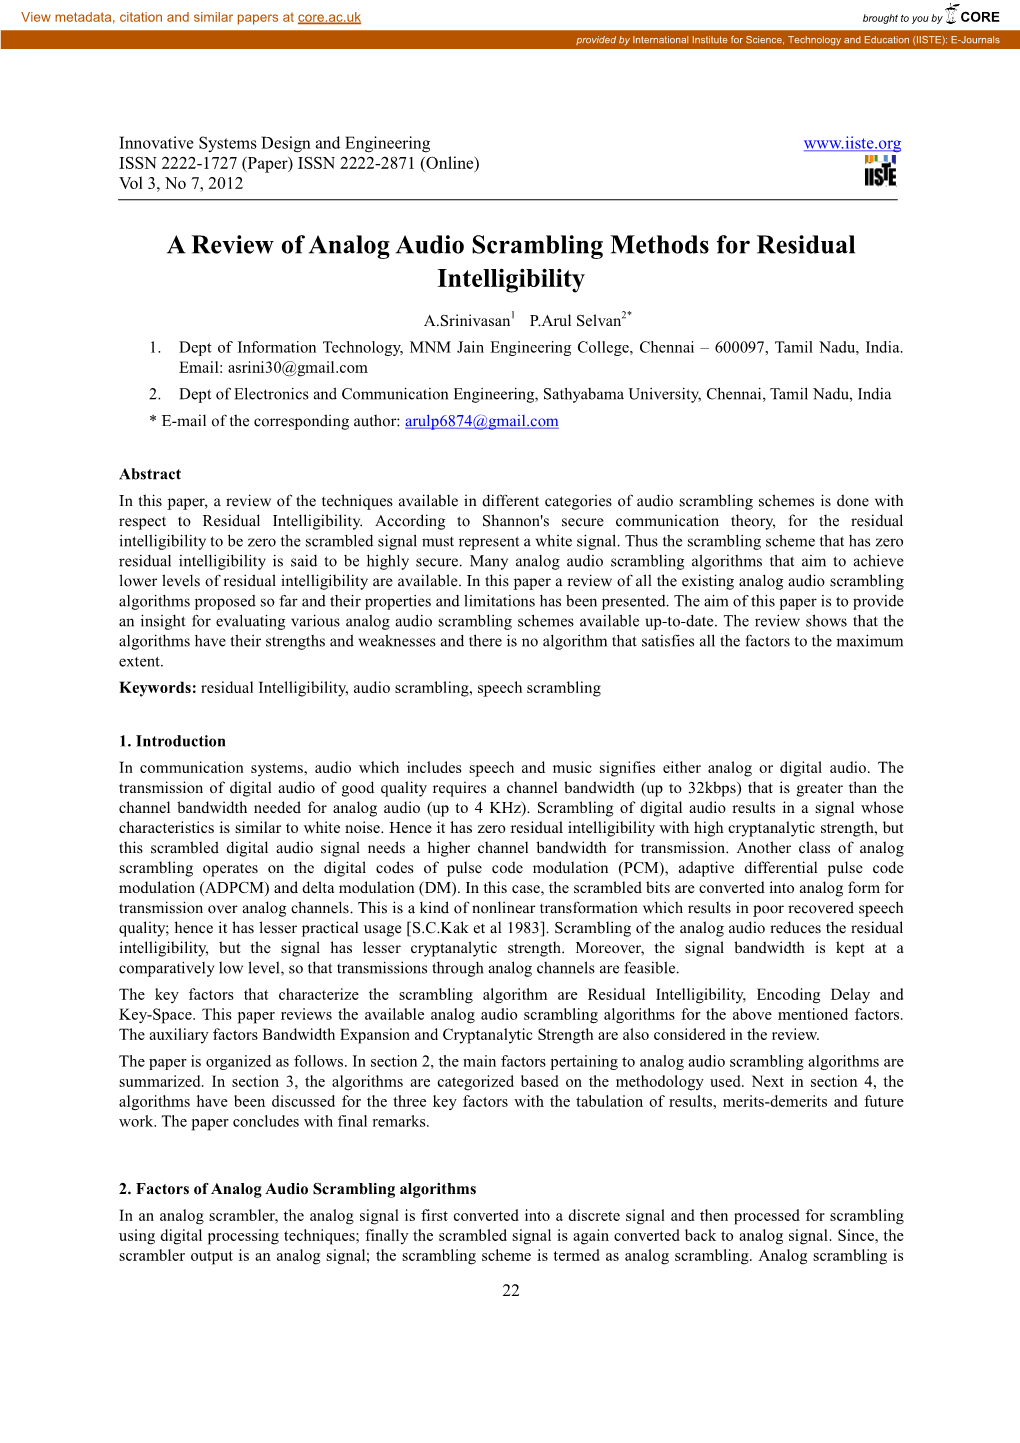 A Review of Analog Audio Scrambling Methods for Residual Intelligibility